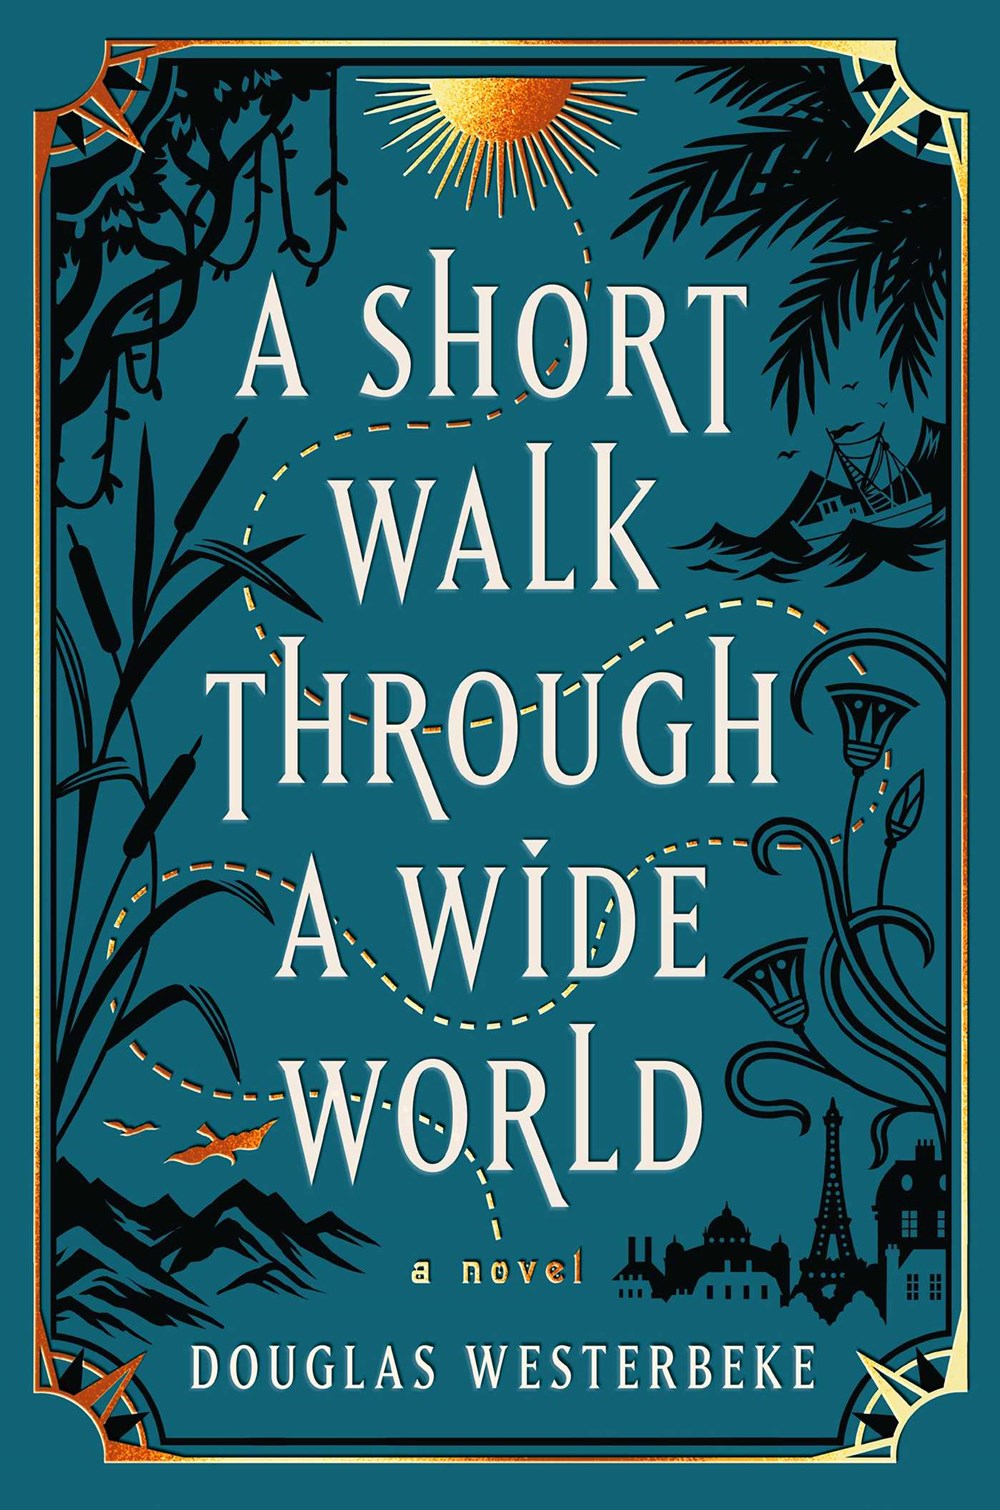 ‘A Short Walk Through a Wide World’ by Douglas Westerbeke | SFF Debut of the Month